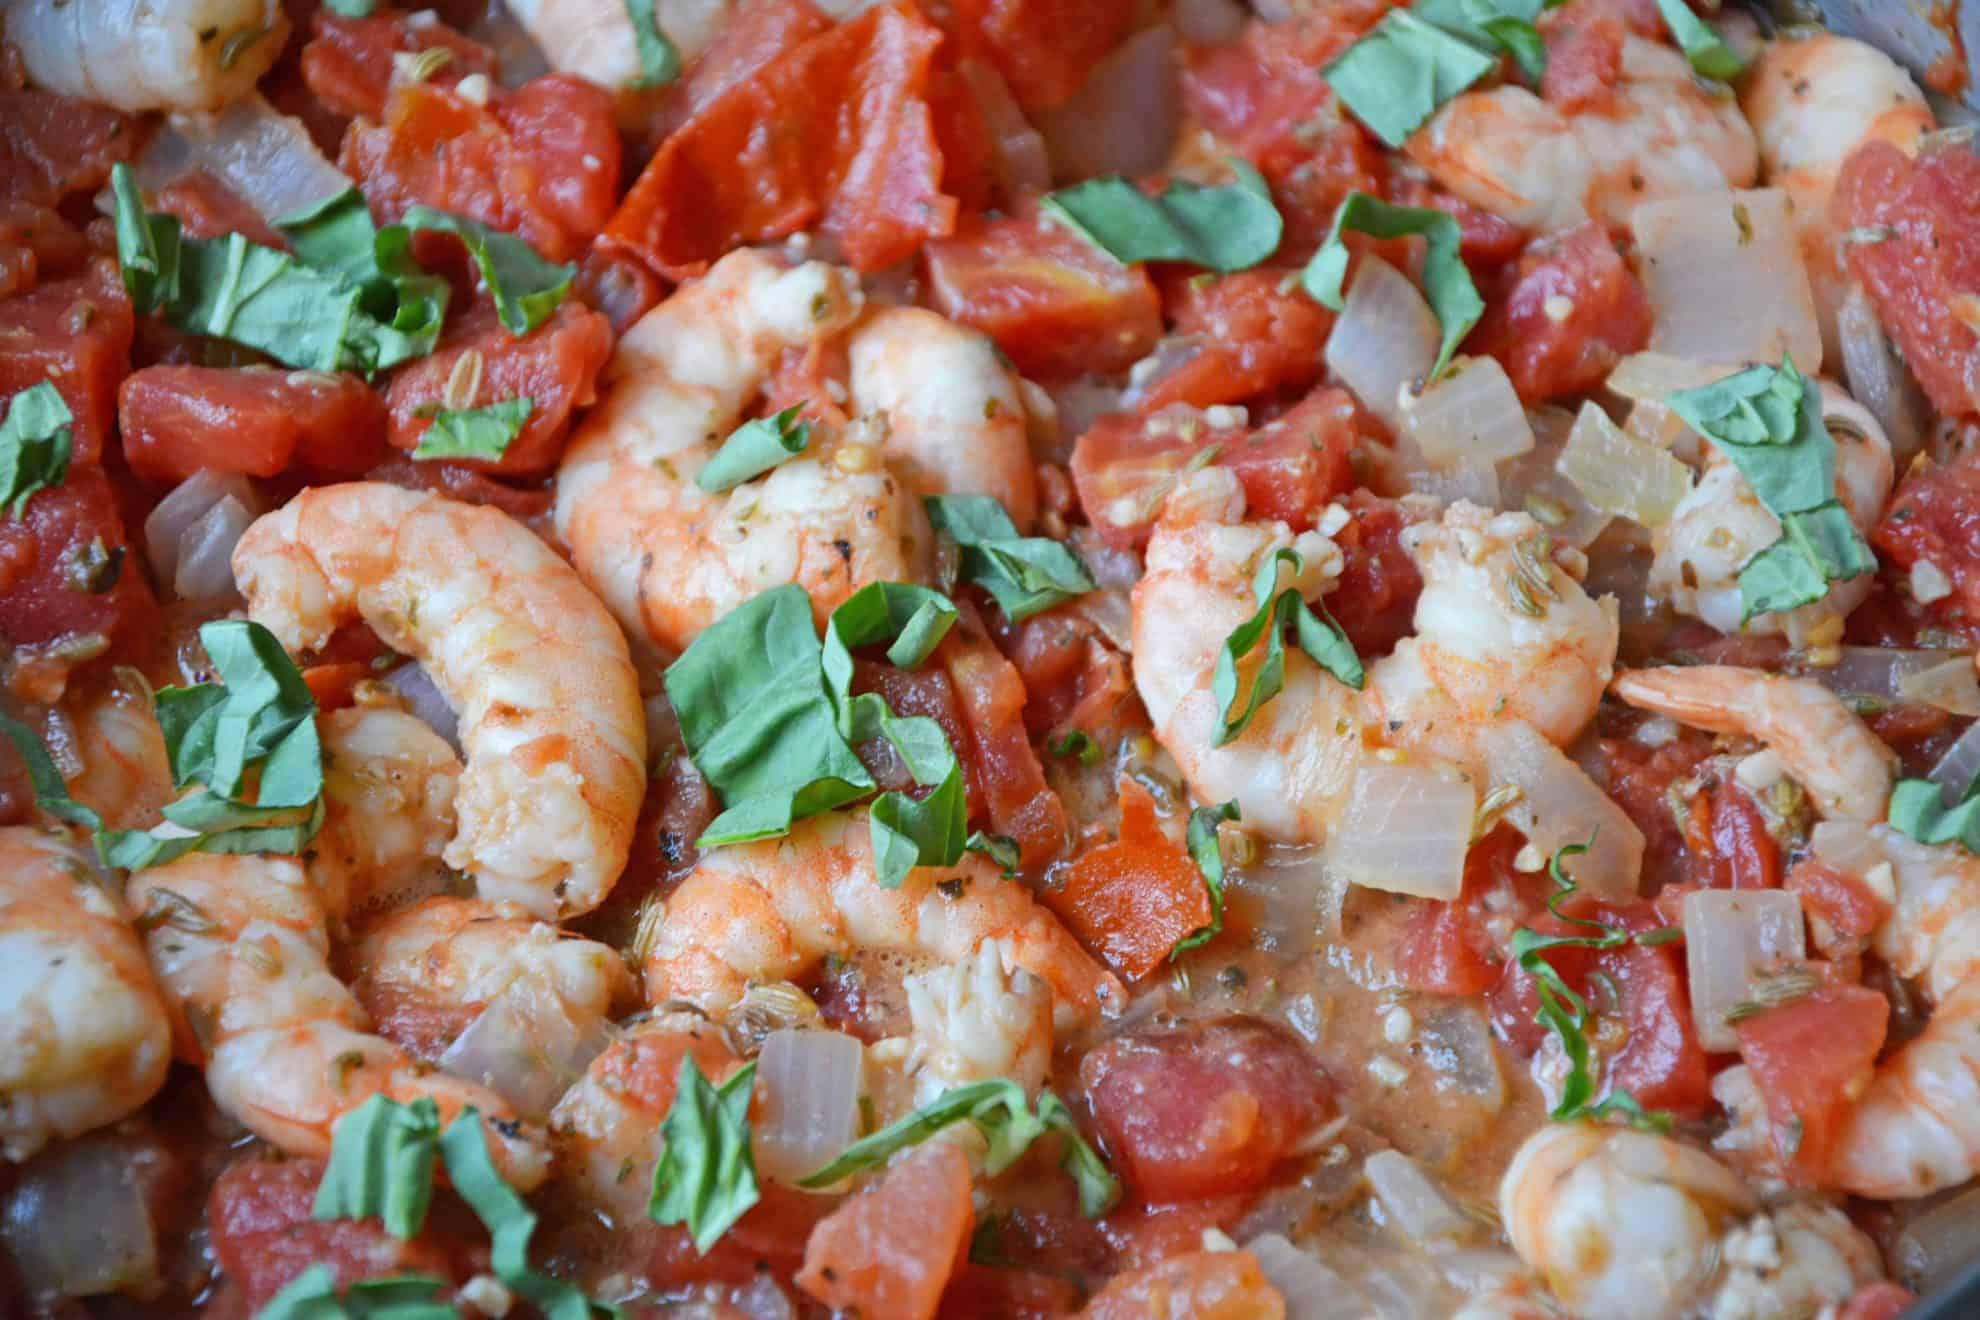 Tomato Basil Shrimp Pasta is an easy and healthy shrimp pasta recipe. It's great for busy weeknights but full of flavor and sure to impress guests! #shrimppasta #shrimpmeals #shrimppastarecipe www.savoryexperiments.com